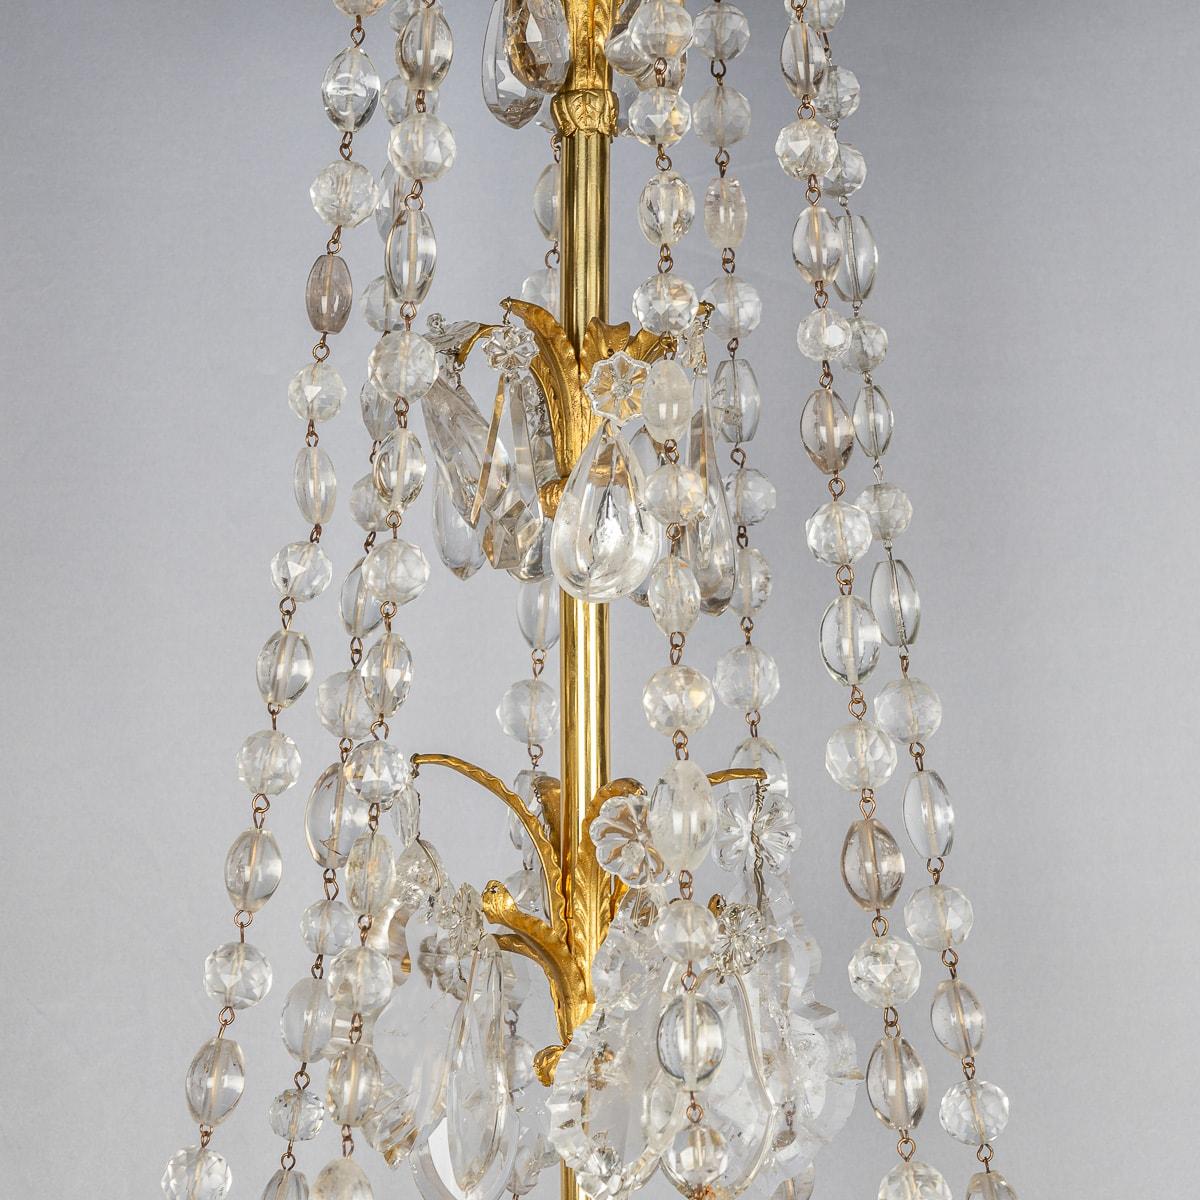 Late 18th Century Antique 18th Century French Ormolu & Cut Rock Crystal Chandelier c.1770 For Sale